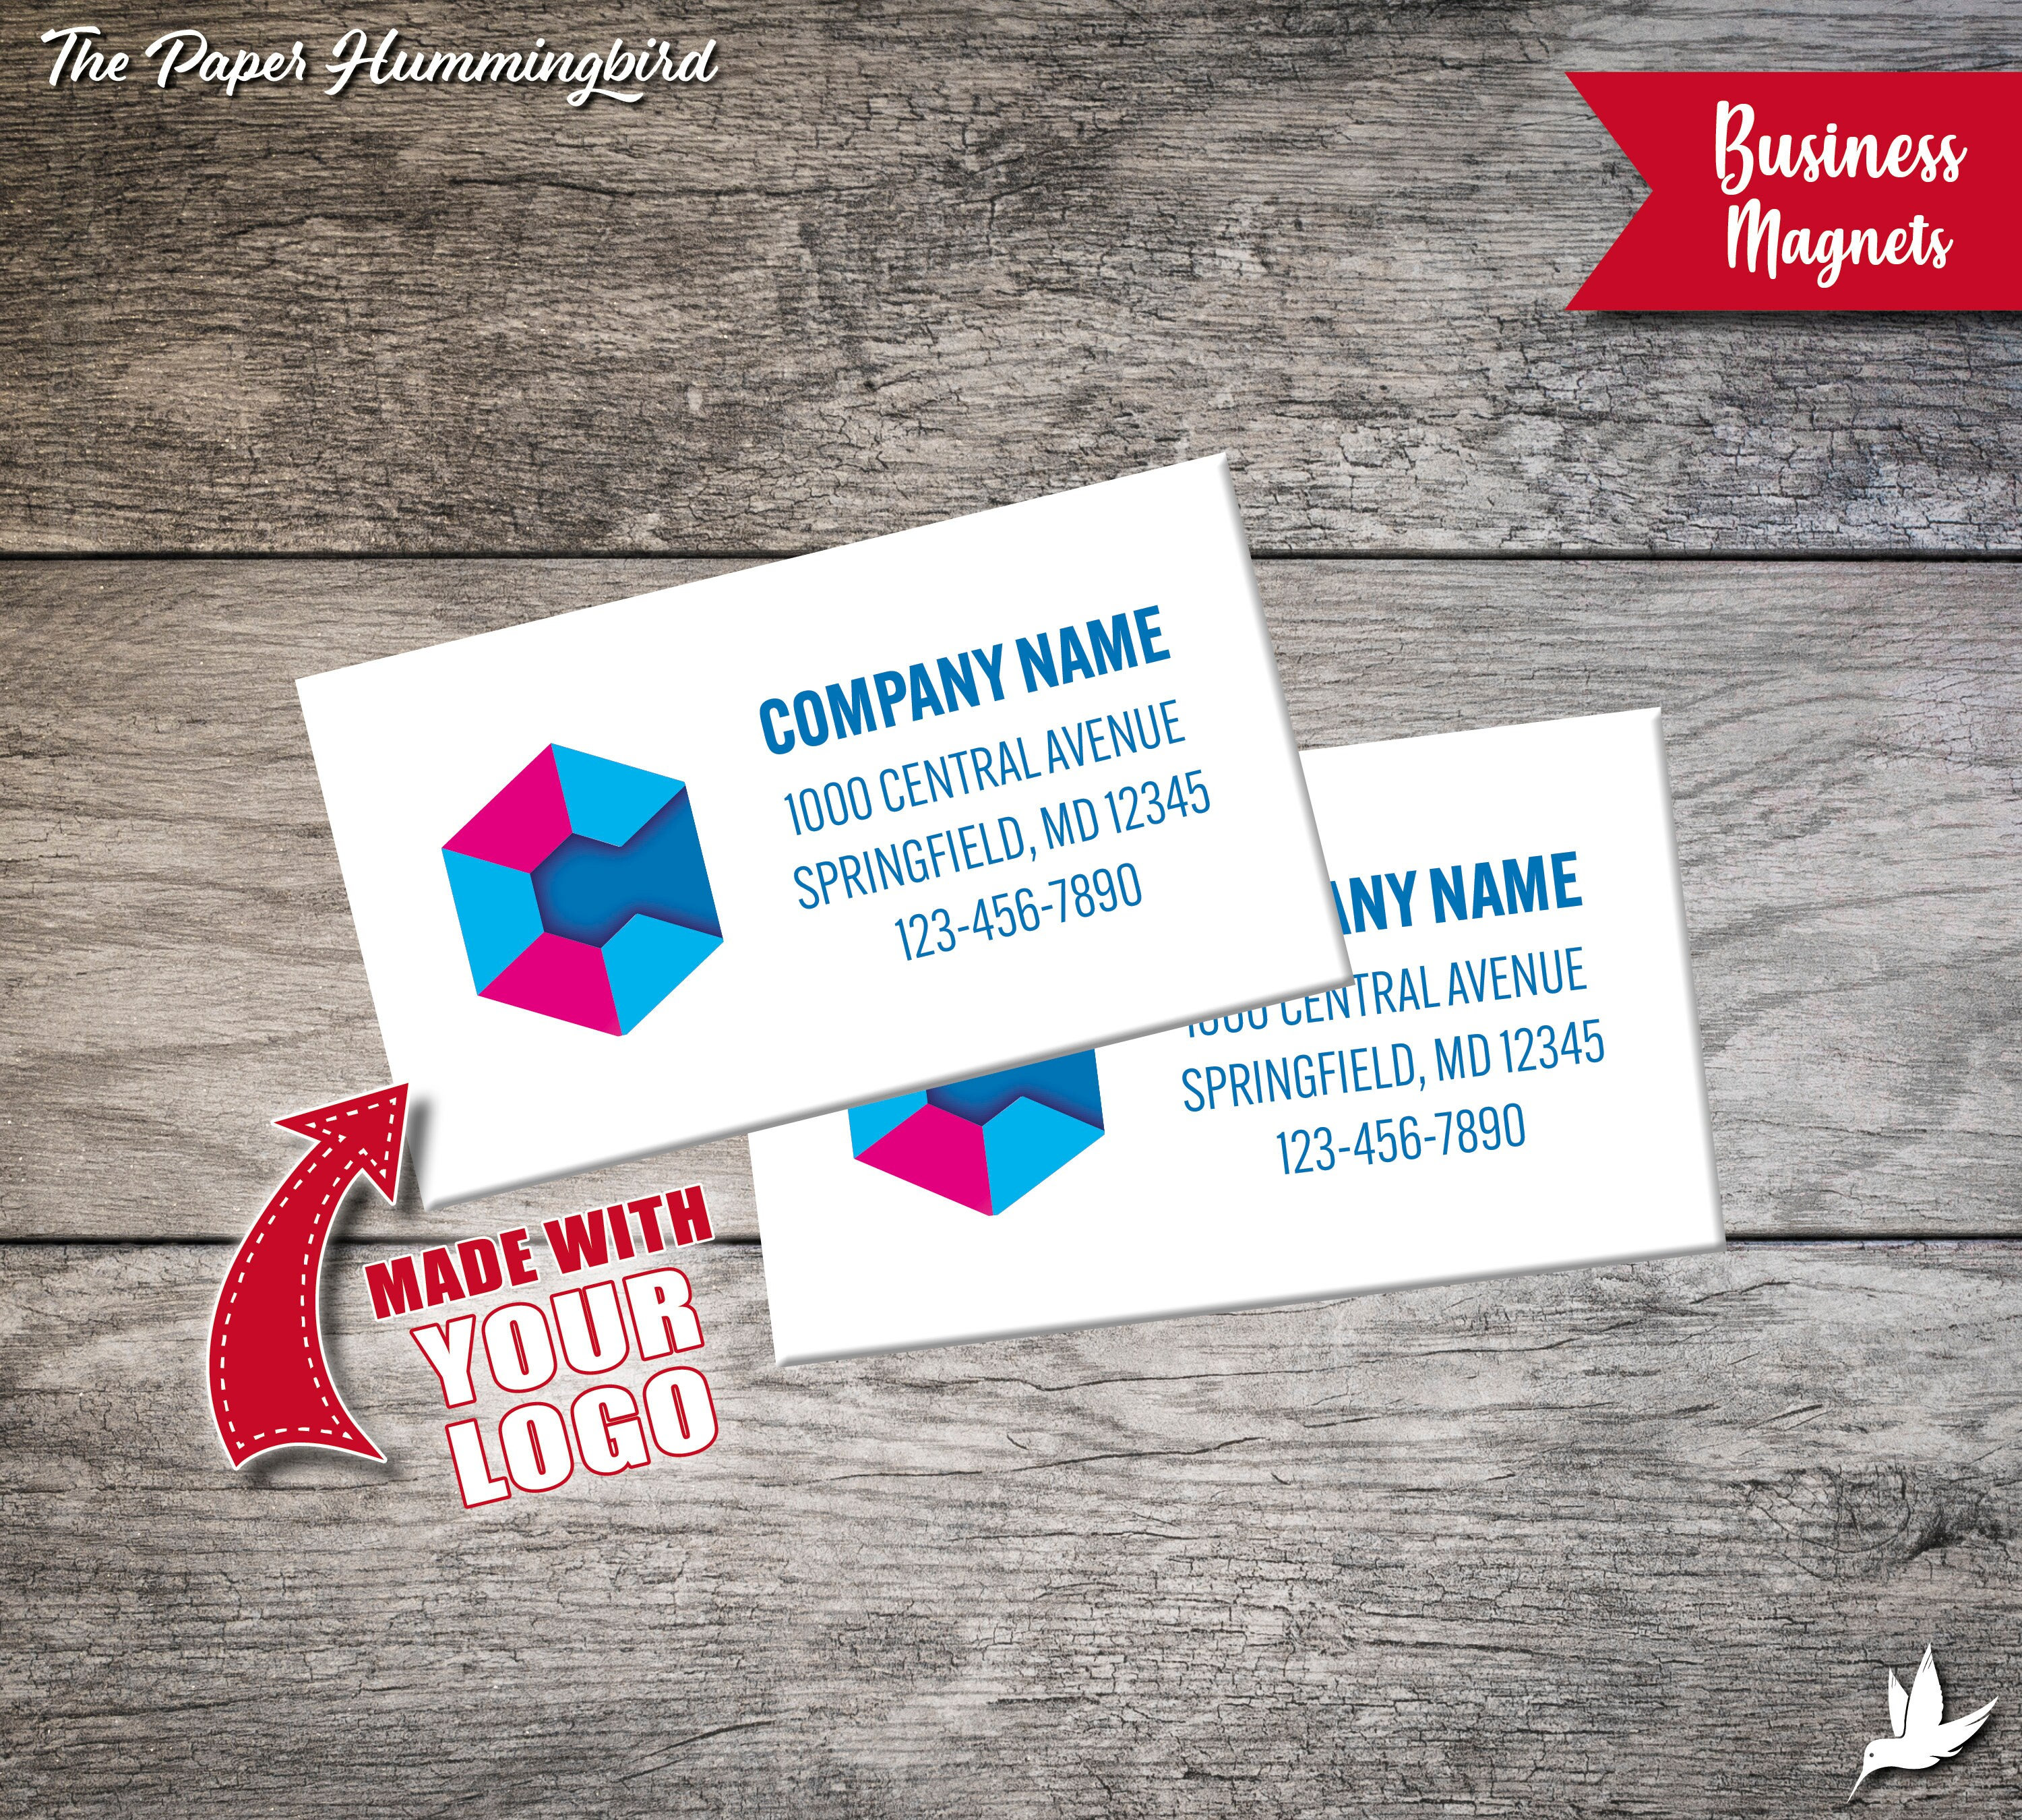 Business Card Magnets for Memorable Connections